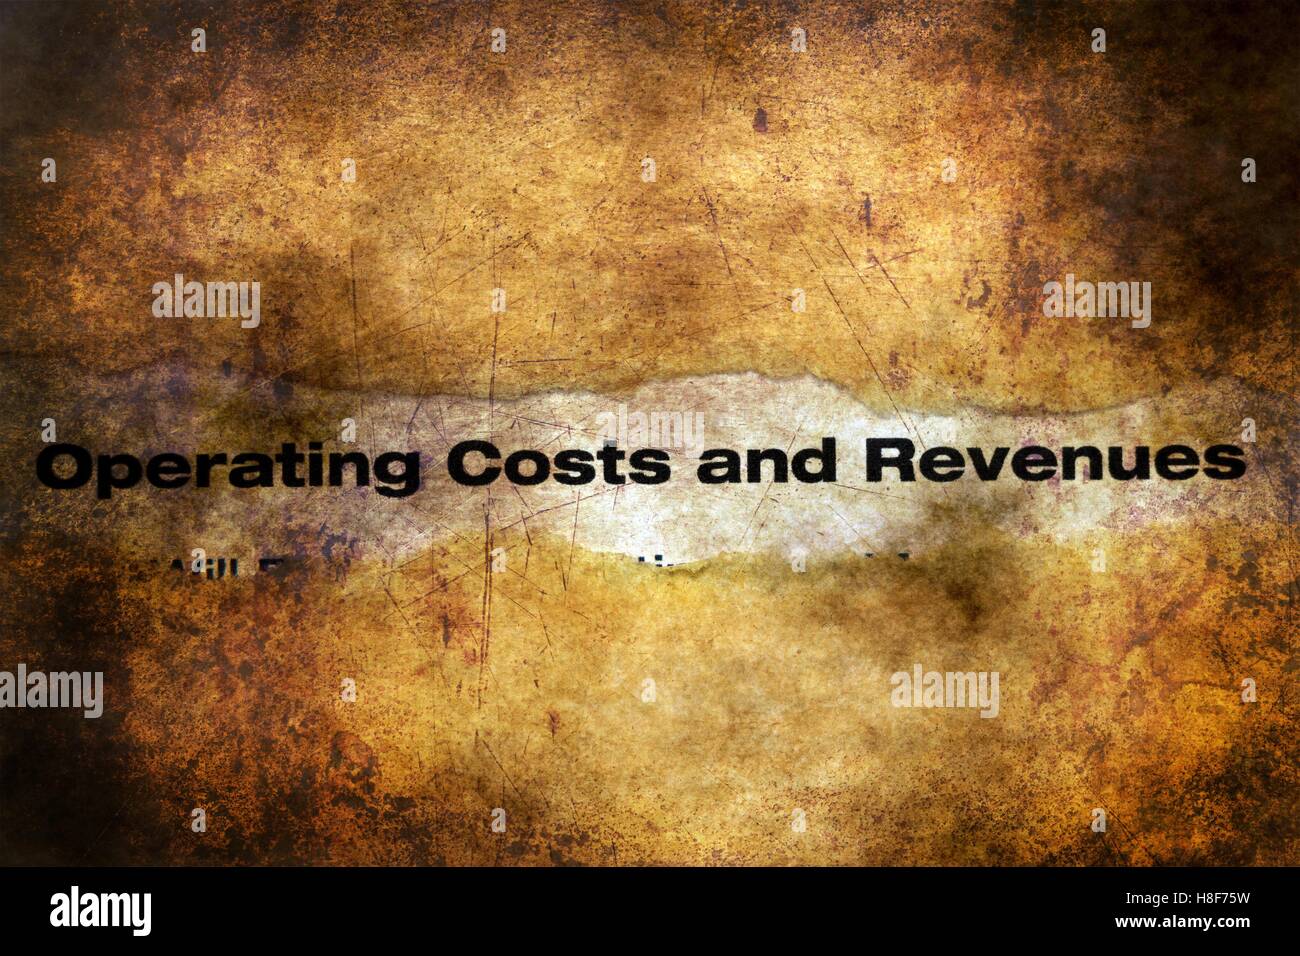 Operating costs and revenues grunge concept Stock Photo